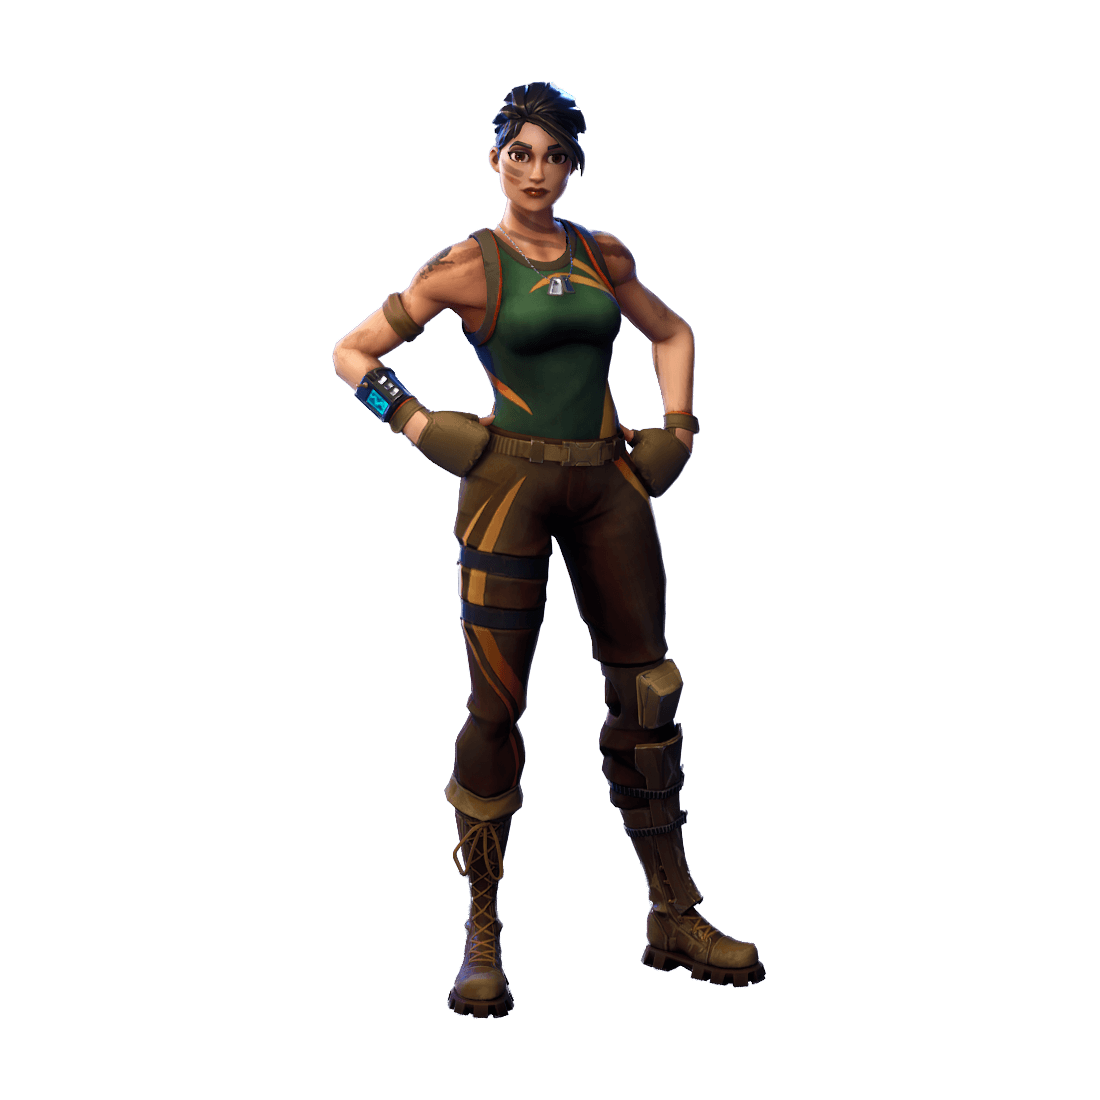 Jungle Scout Fortnite Outfit Skin How to Get + Info